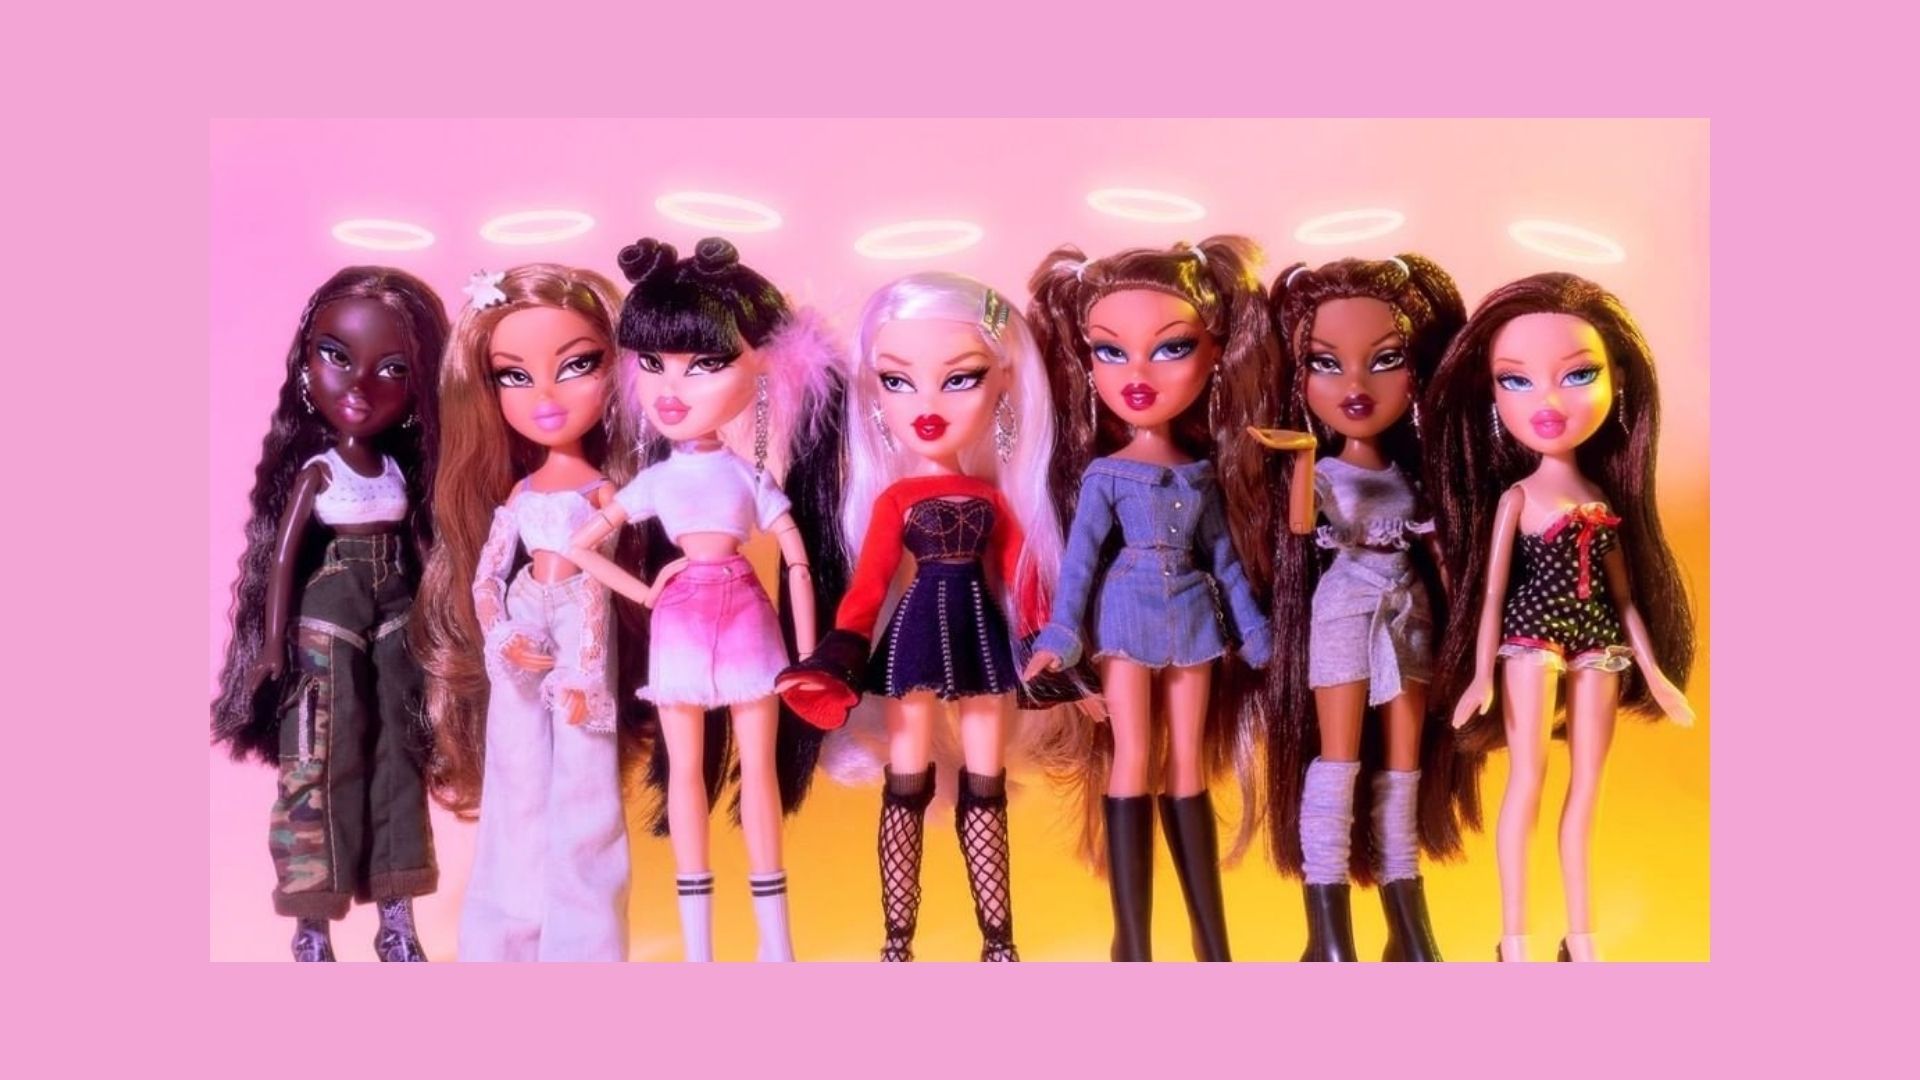 A line of Bratz dolls with different skin tones, hair colors, and outfits. - Bratz